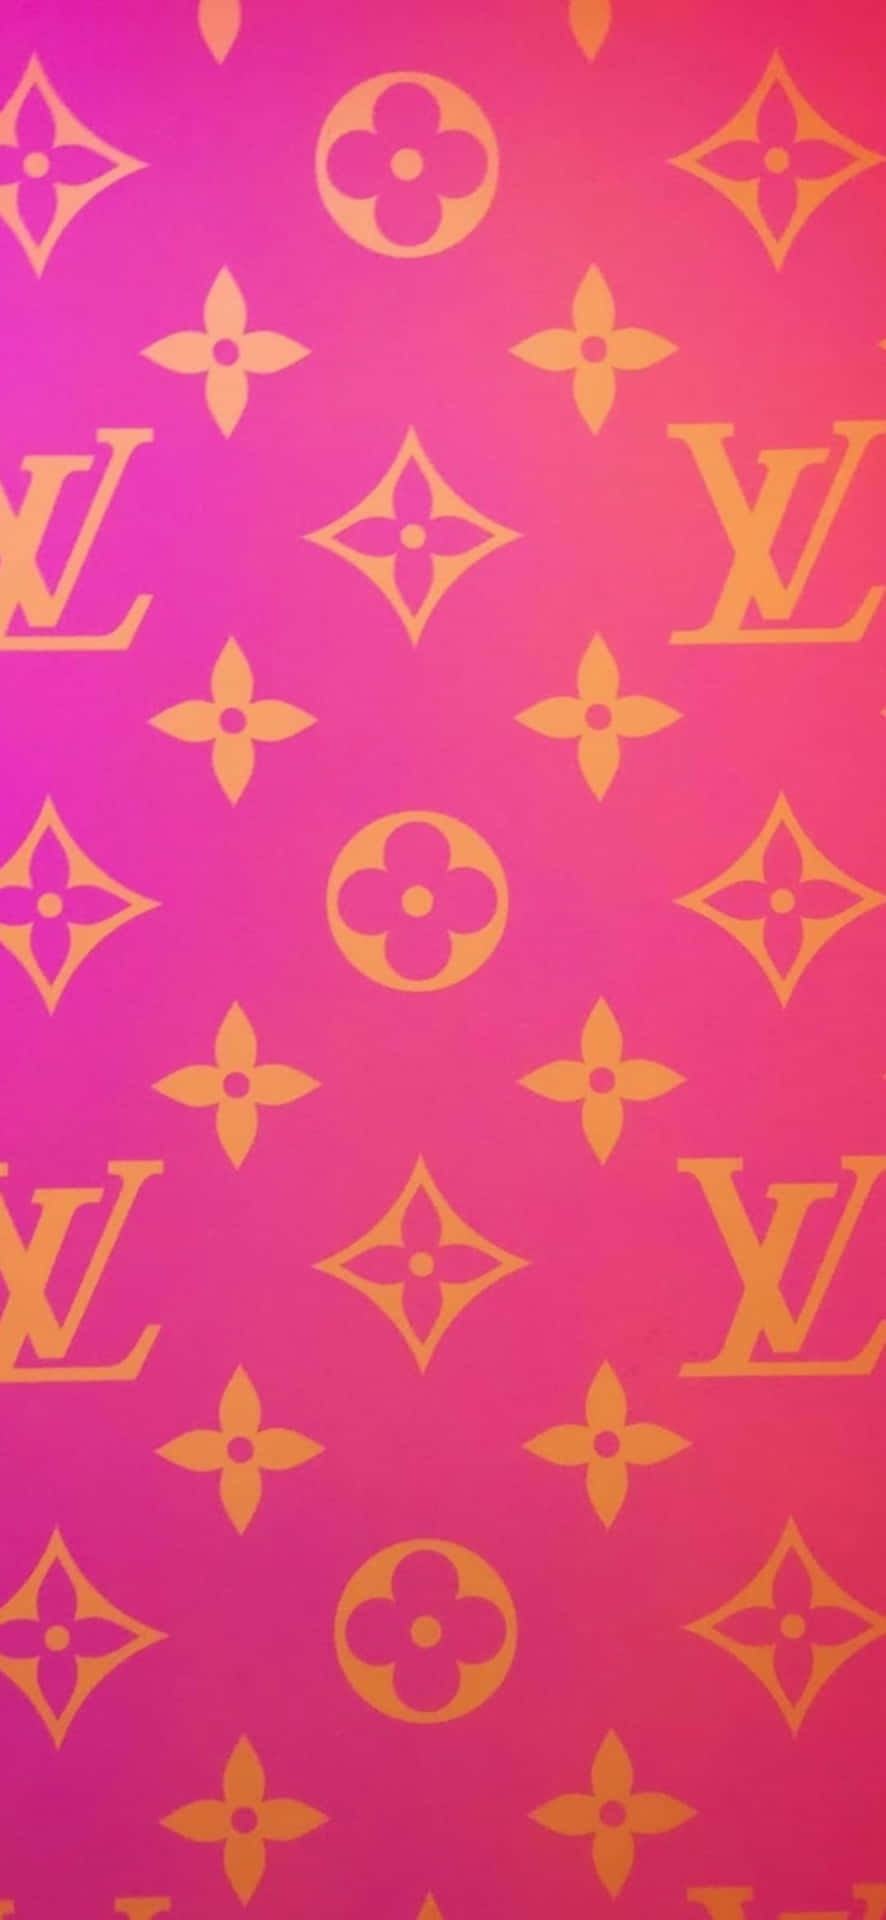 Louis Vuitton (pink and white)  Pink wallpaper iphone, Iphone